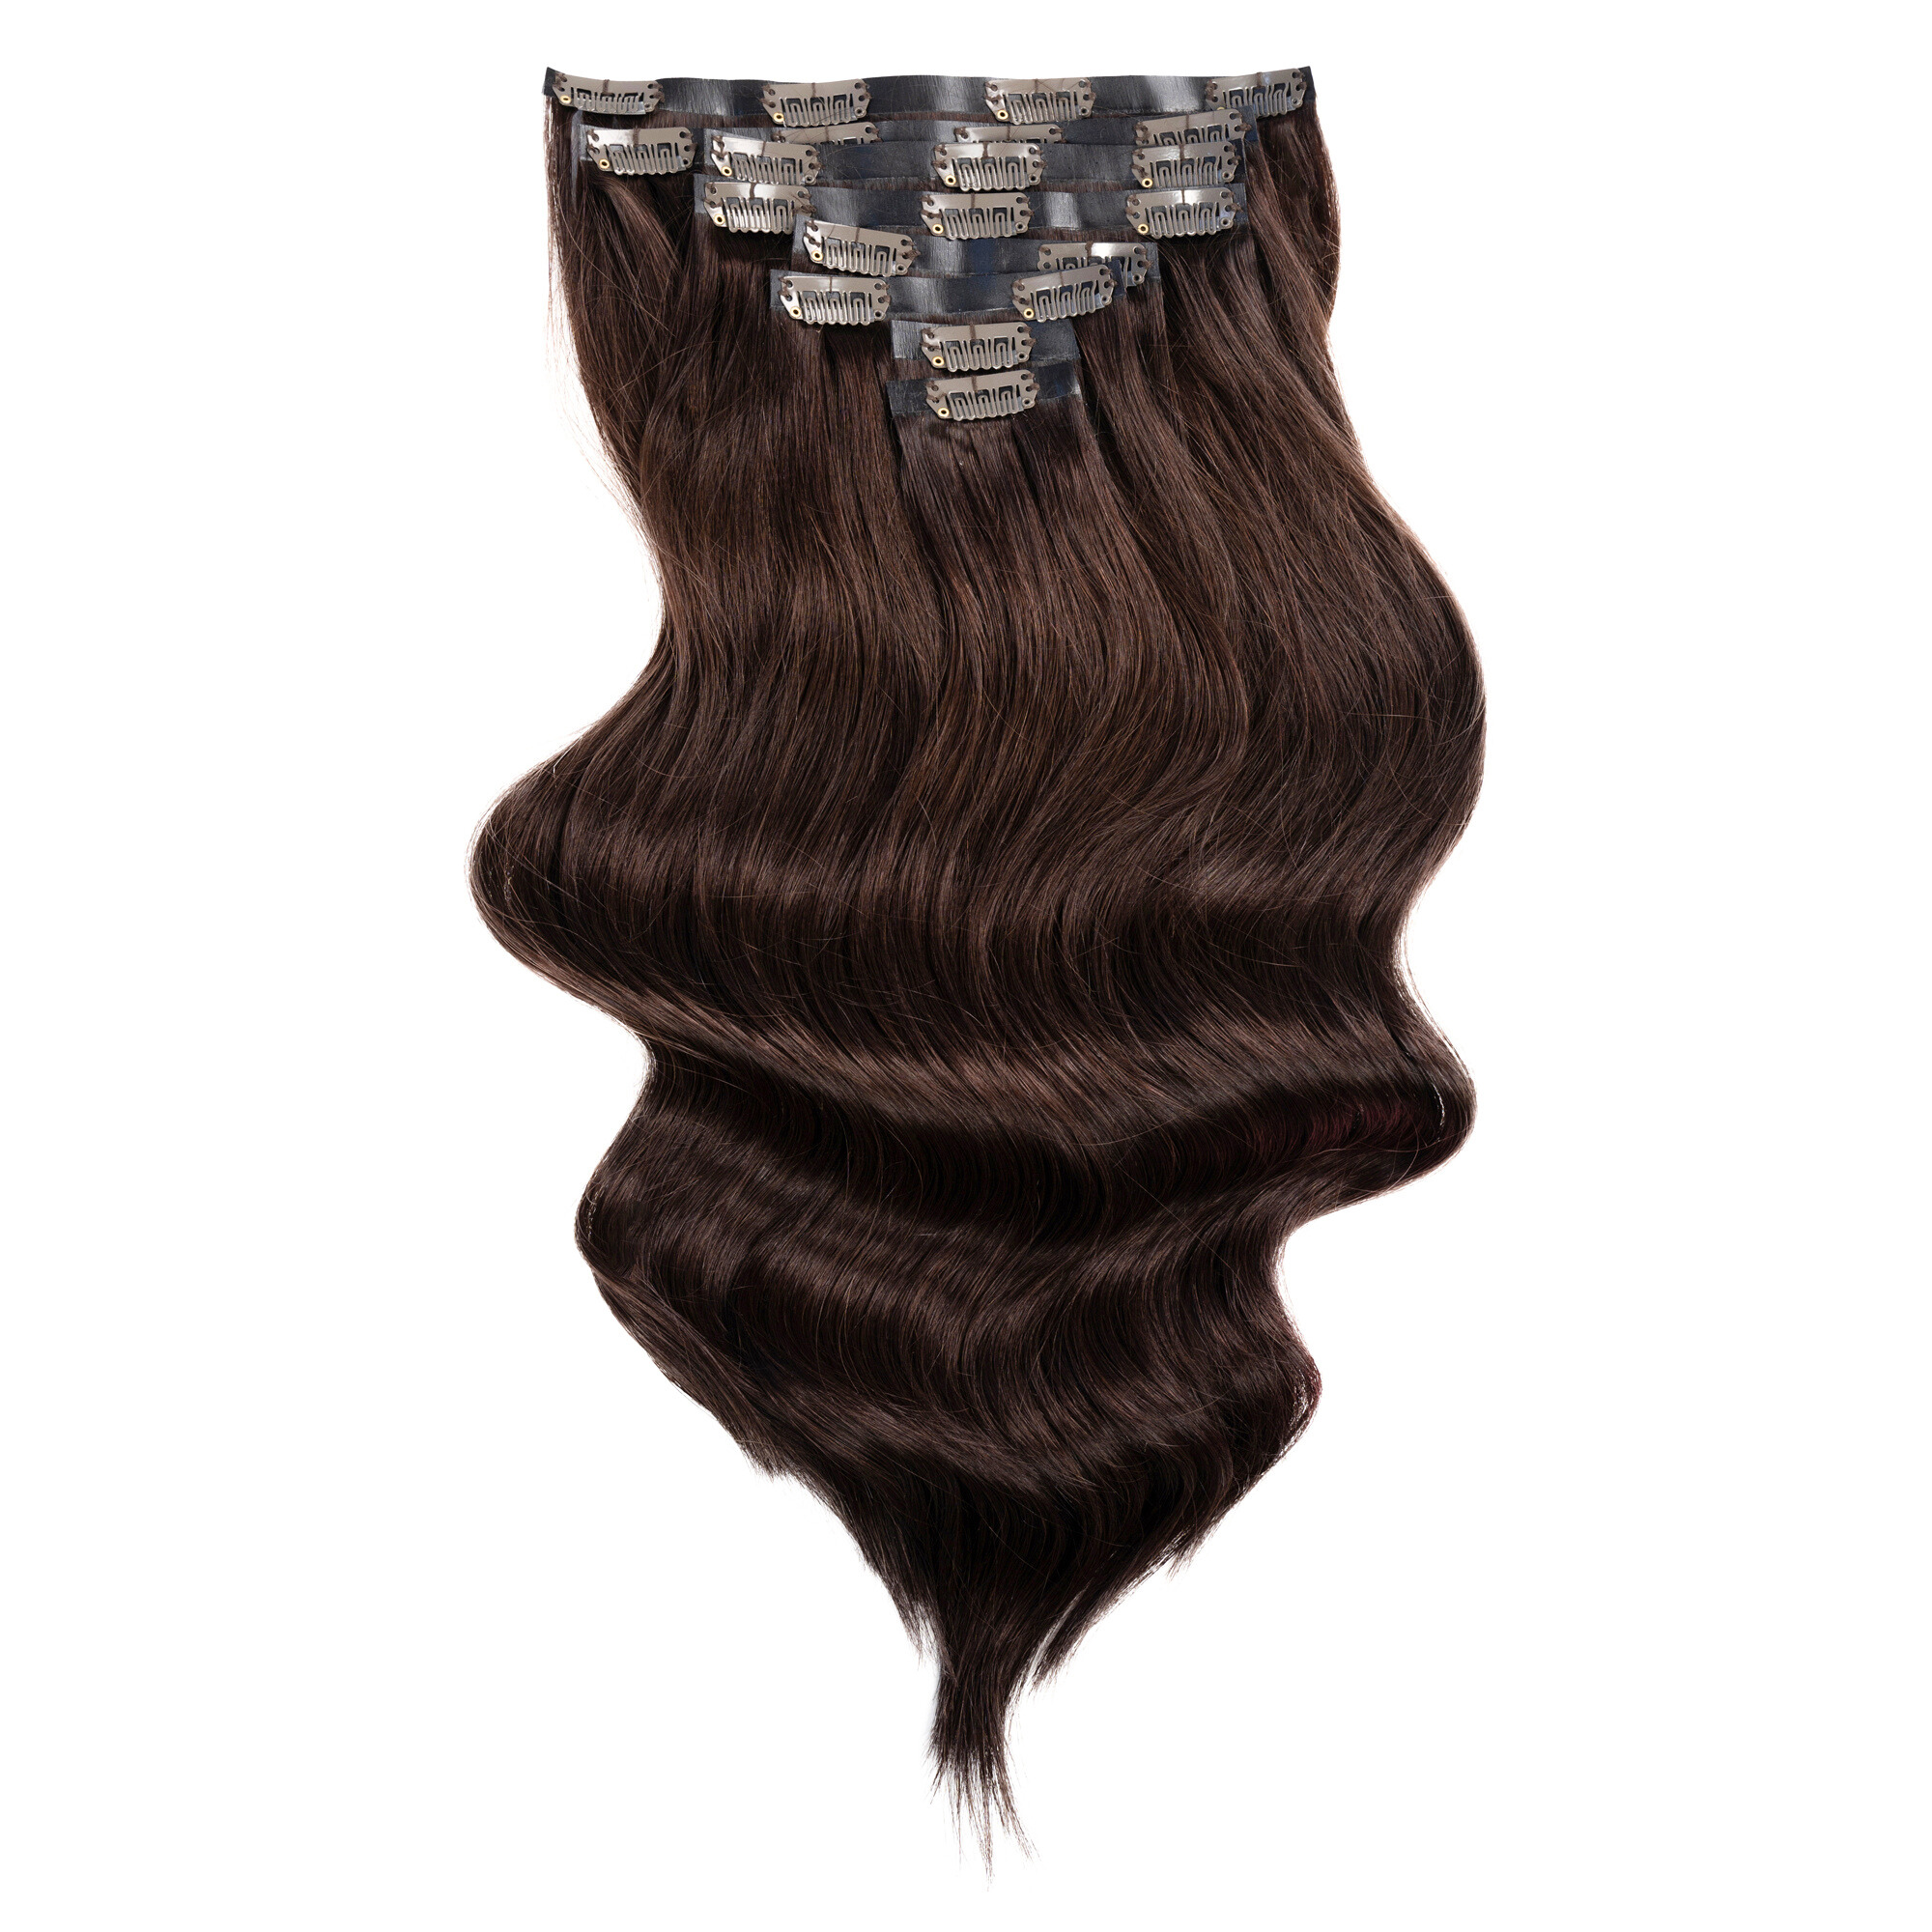 Empress Deluxe Clip-in Hair Extensions 18" Colour 2 Dark Brown - Maneology Hair Extensions